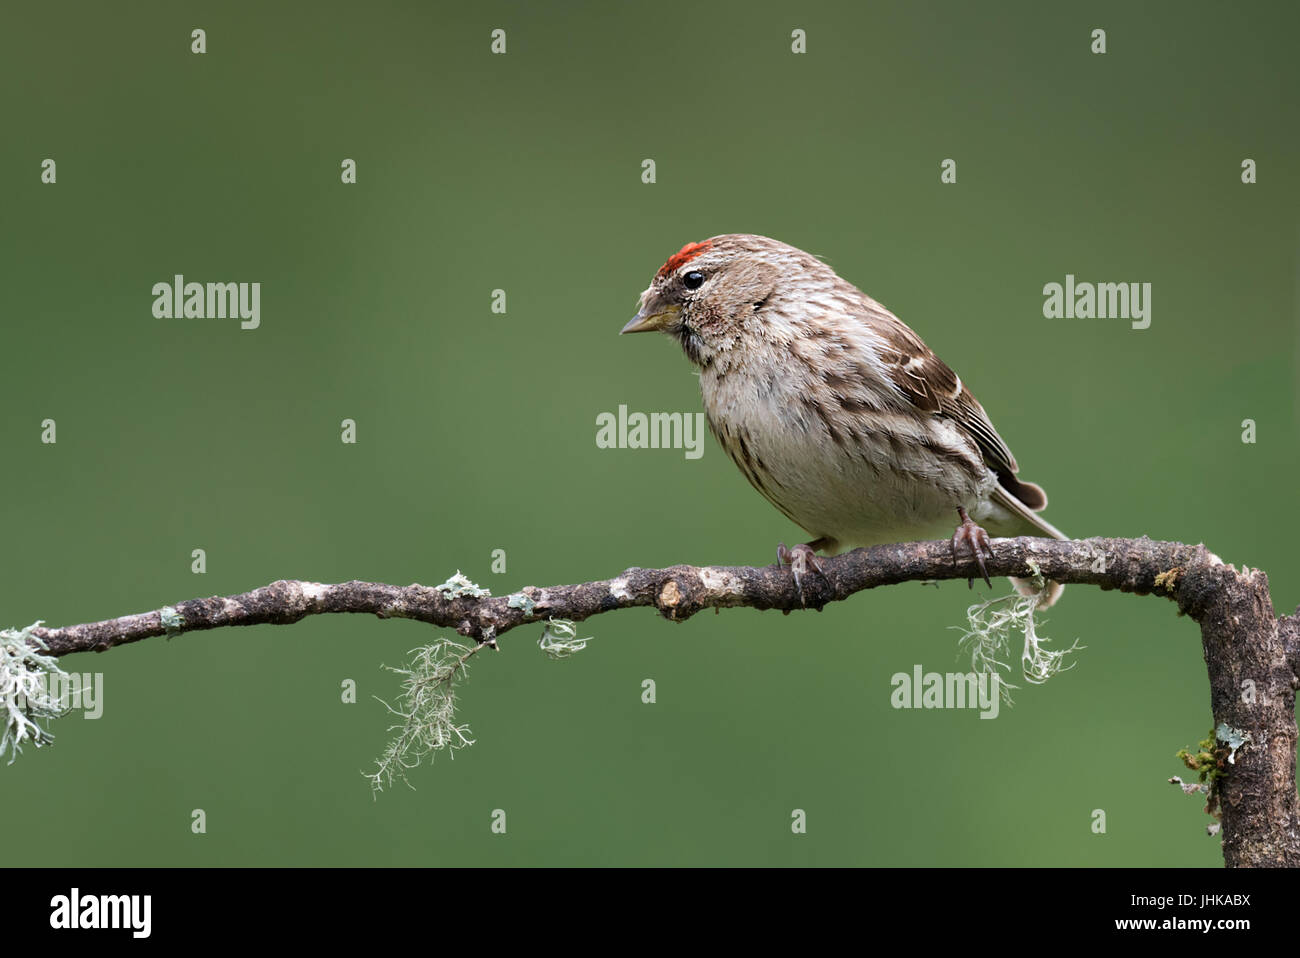 A close portrait of a lesser redpoll perched on a branch and looking left Stock Photo